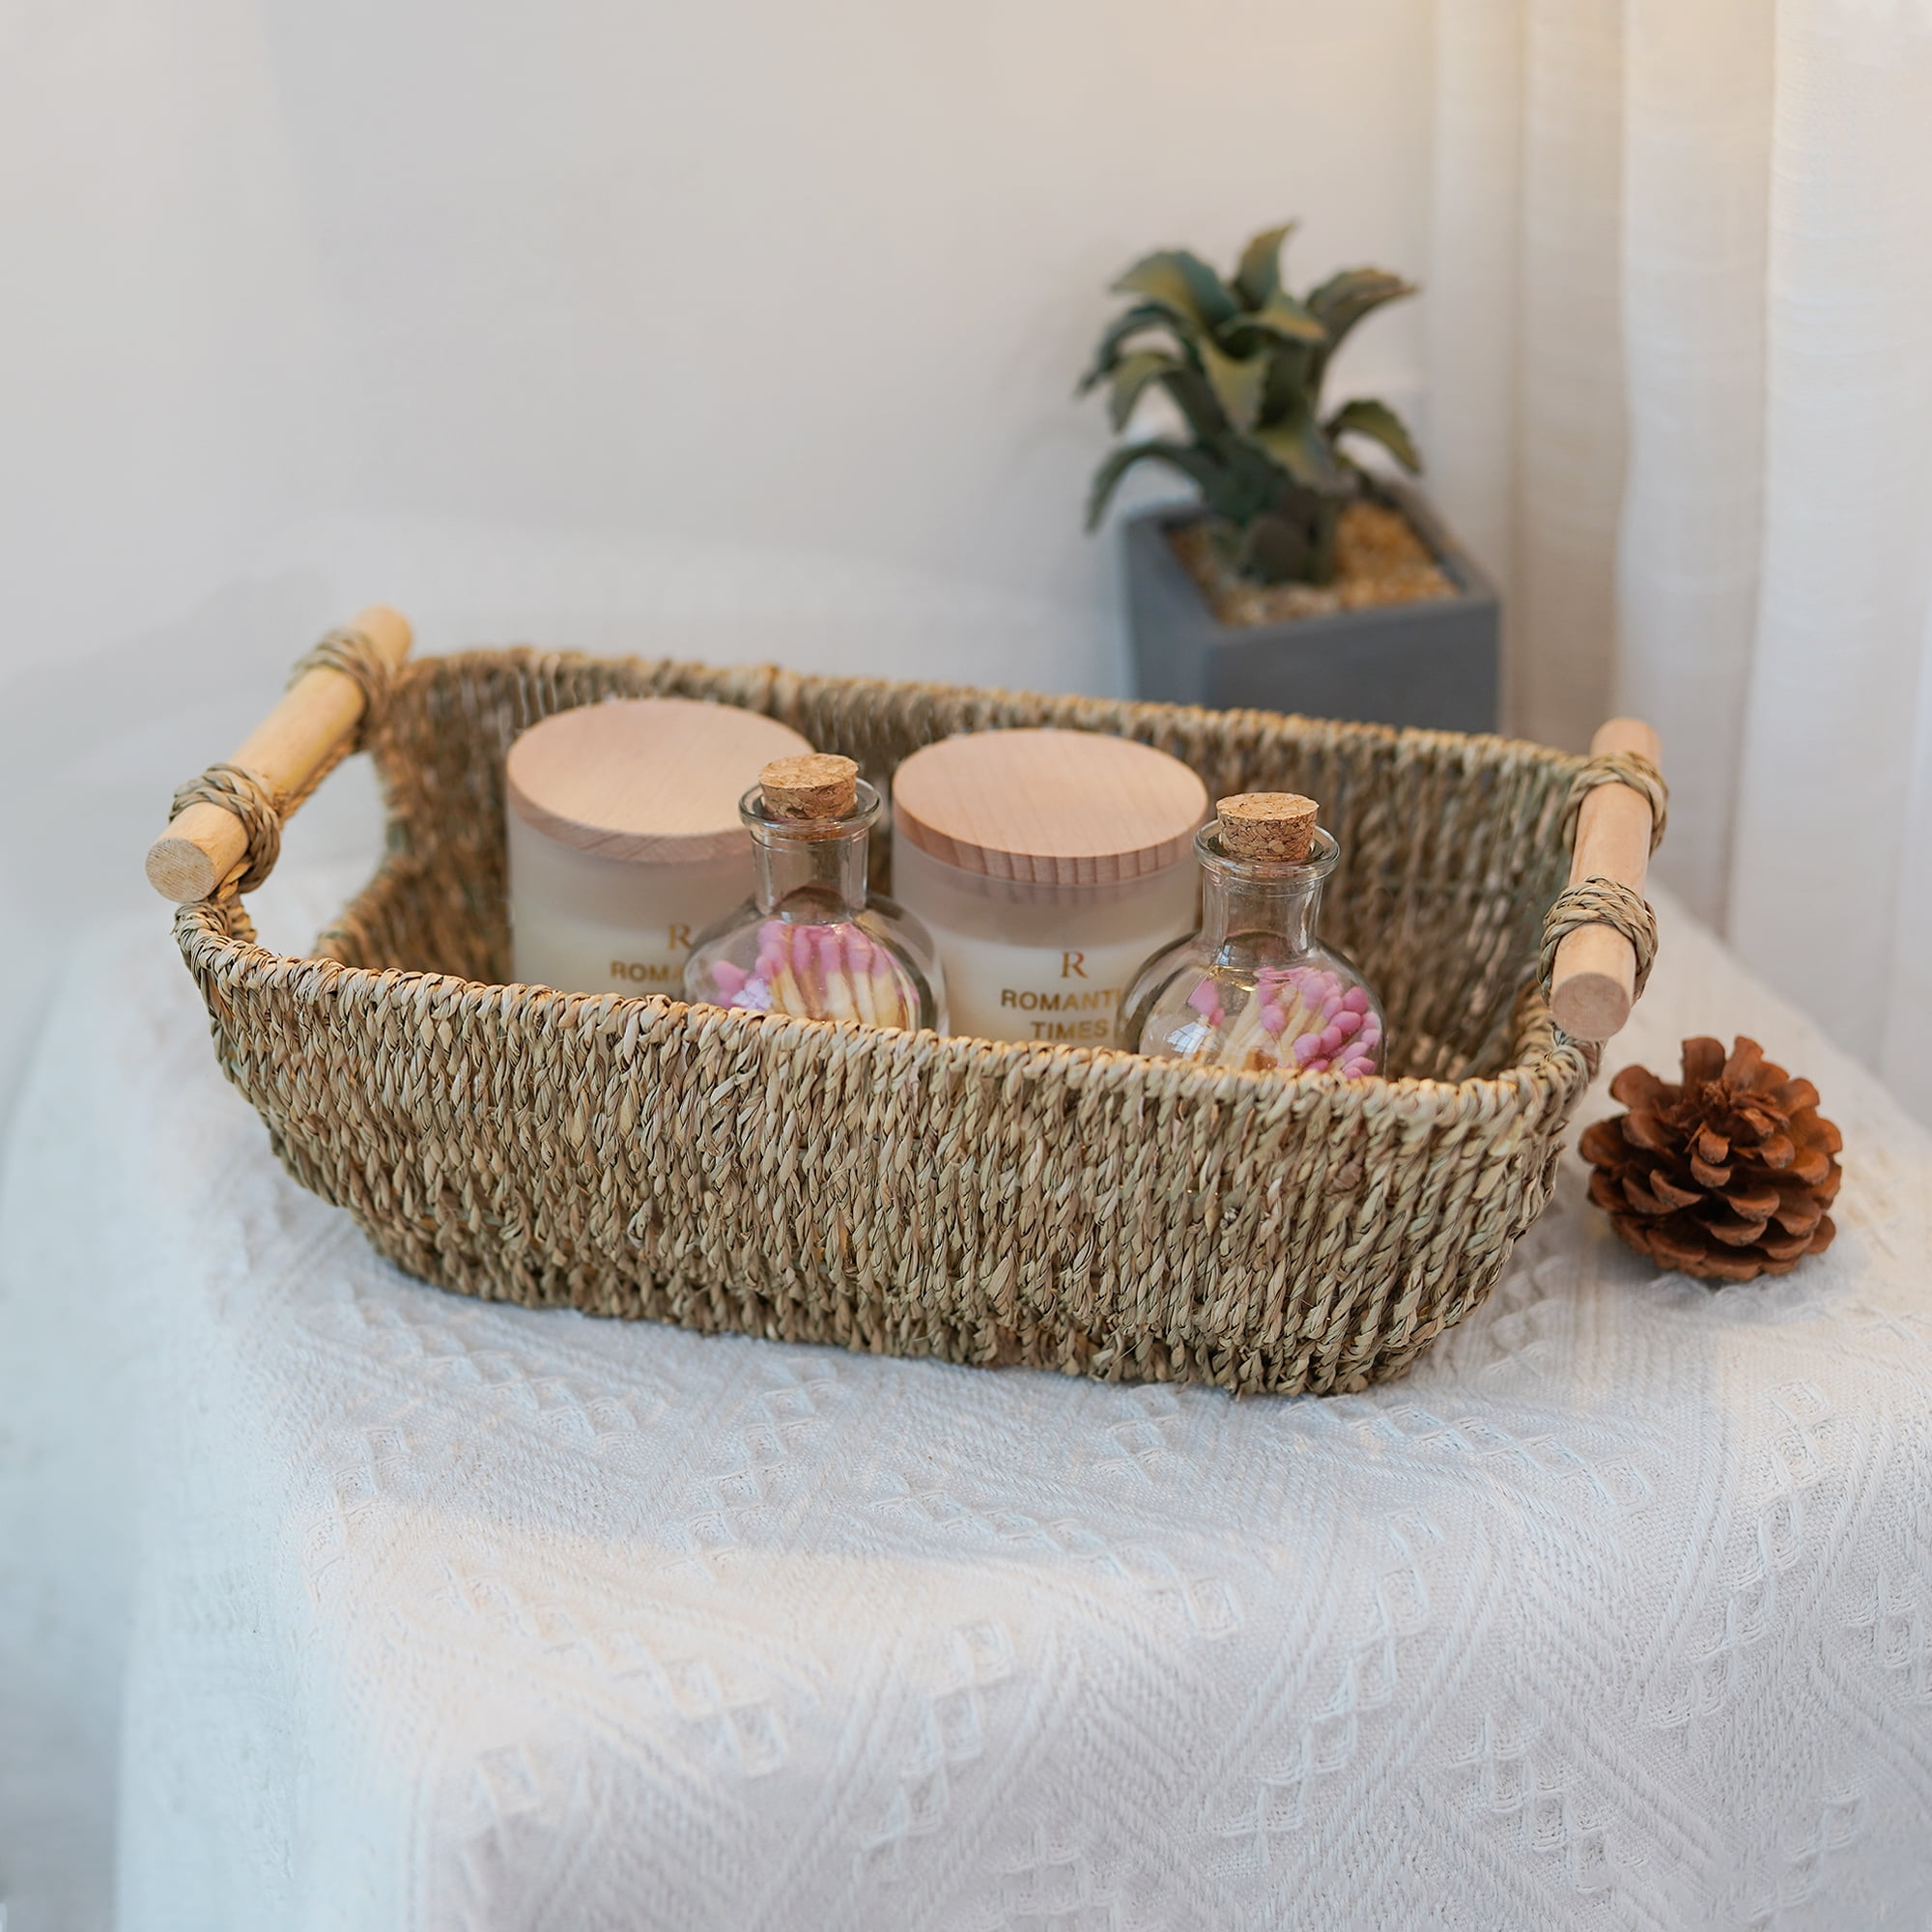 Small Wicker Baskets, Handwoven Baskets for Storage, Seagrass Rattan Baskets with Wooden Handles, 2-Pack, Natural